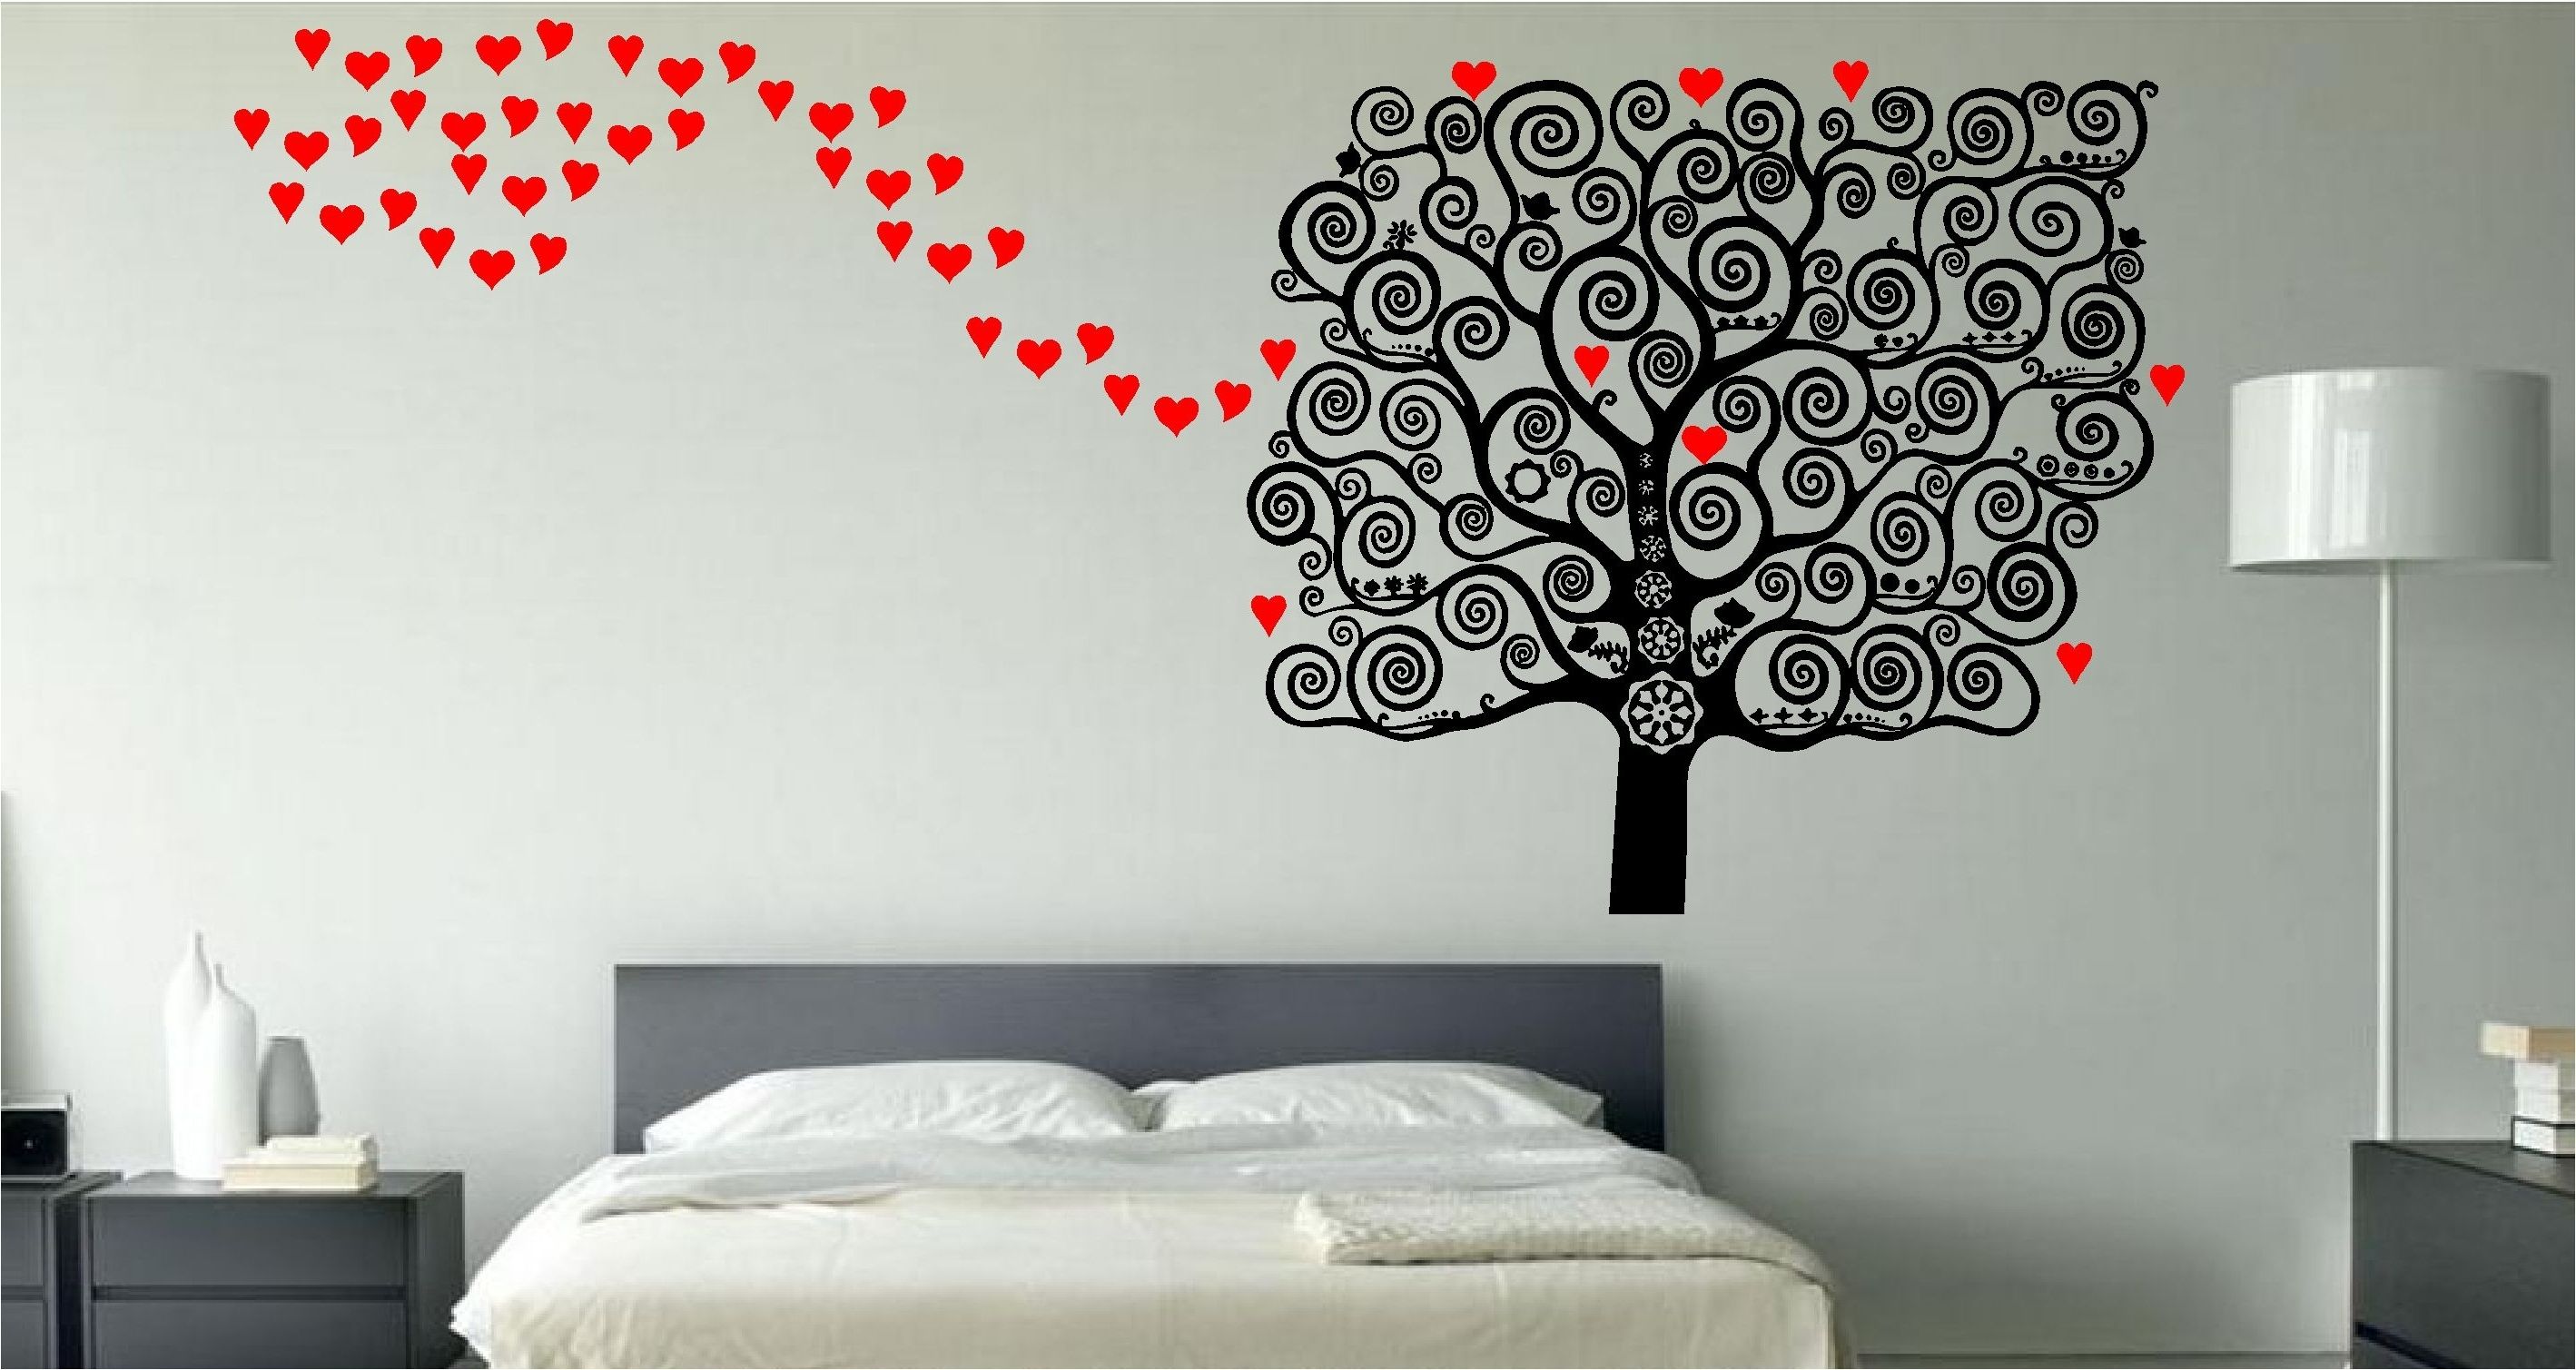 Bedroom : Abstract Wall Art Metal Wall Art Decor Wall Art Decals Regarding Most Current Wall Art For Bedrooms (View 5 of 15)